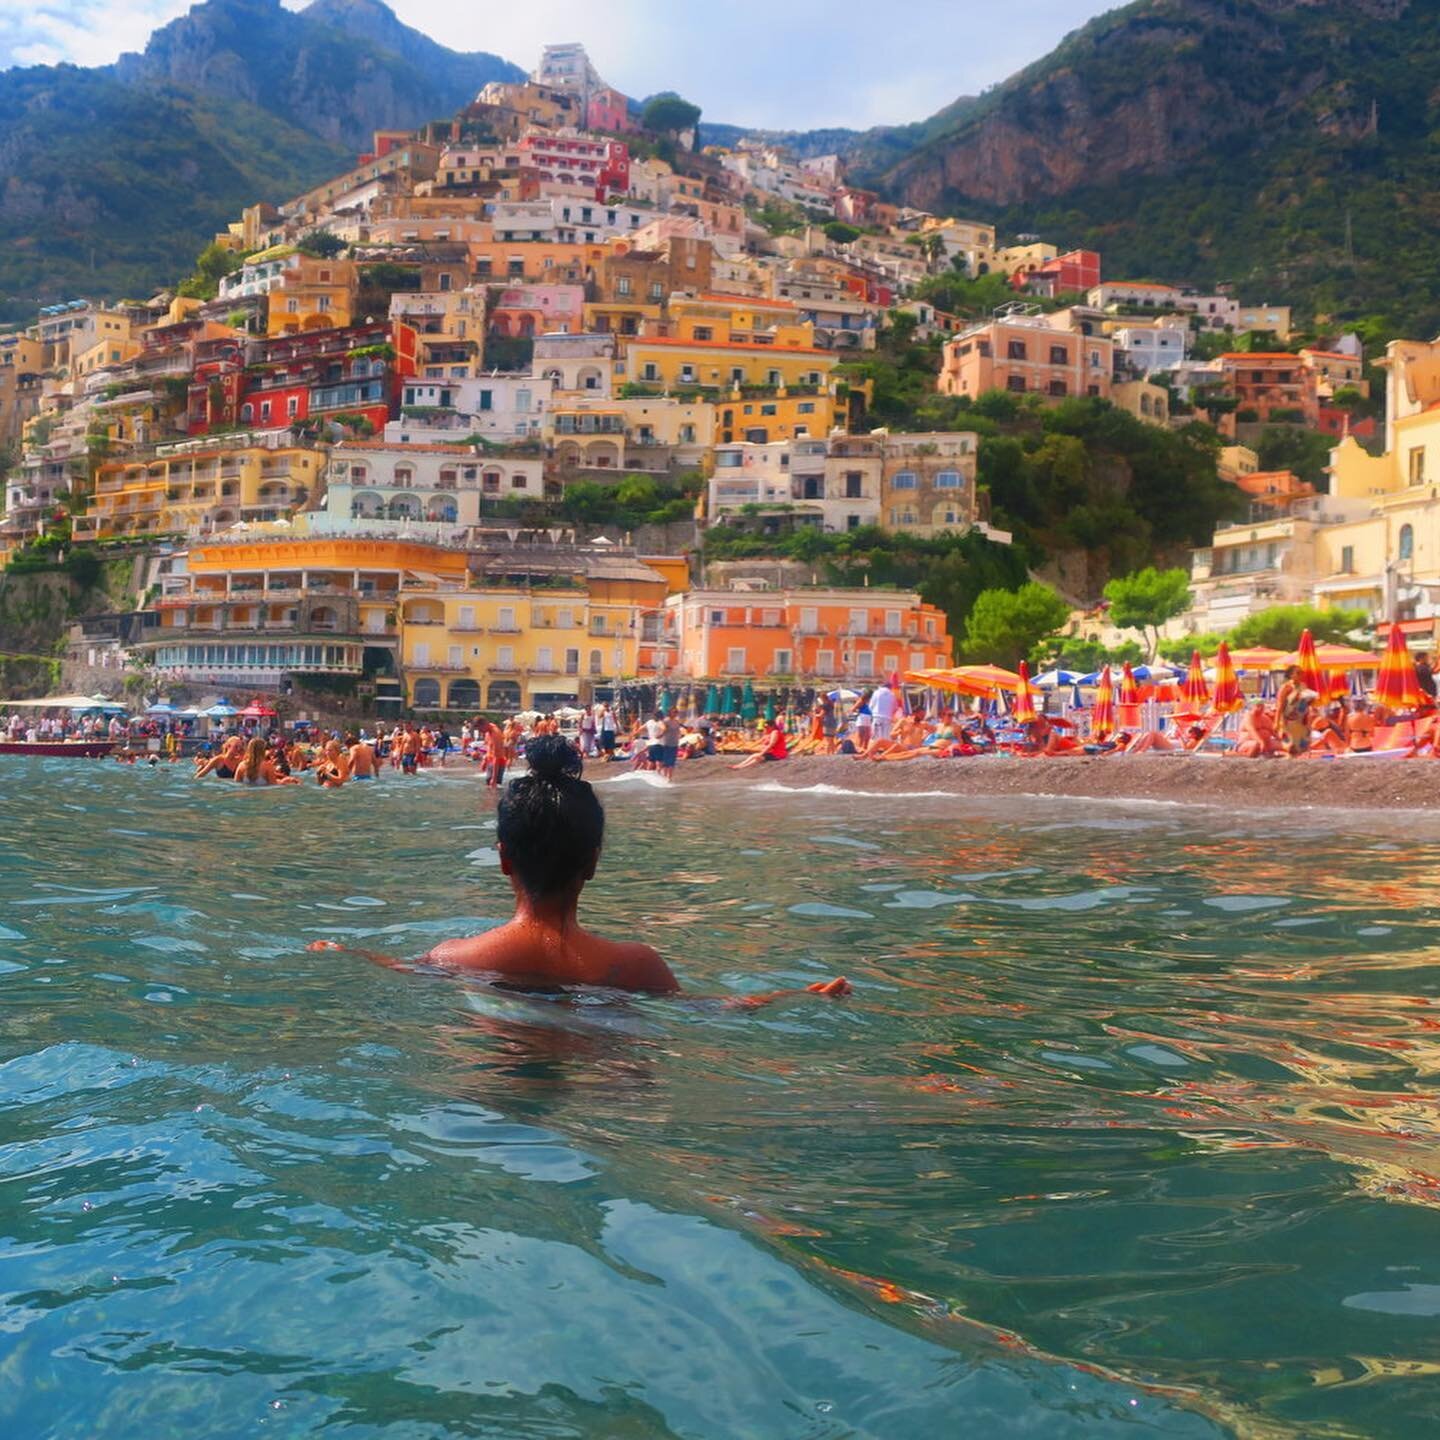 Hoppin off the Amalfi Coast!

Join us for the trip of a lifetime as explore the breathtaking regions of Tuscany and the Amalfi Coast! We&rsquo;ll roam through the beautiful wine towns of Tuscany, taste some of the world&rsquo;s best wines, spend time